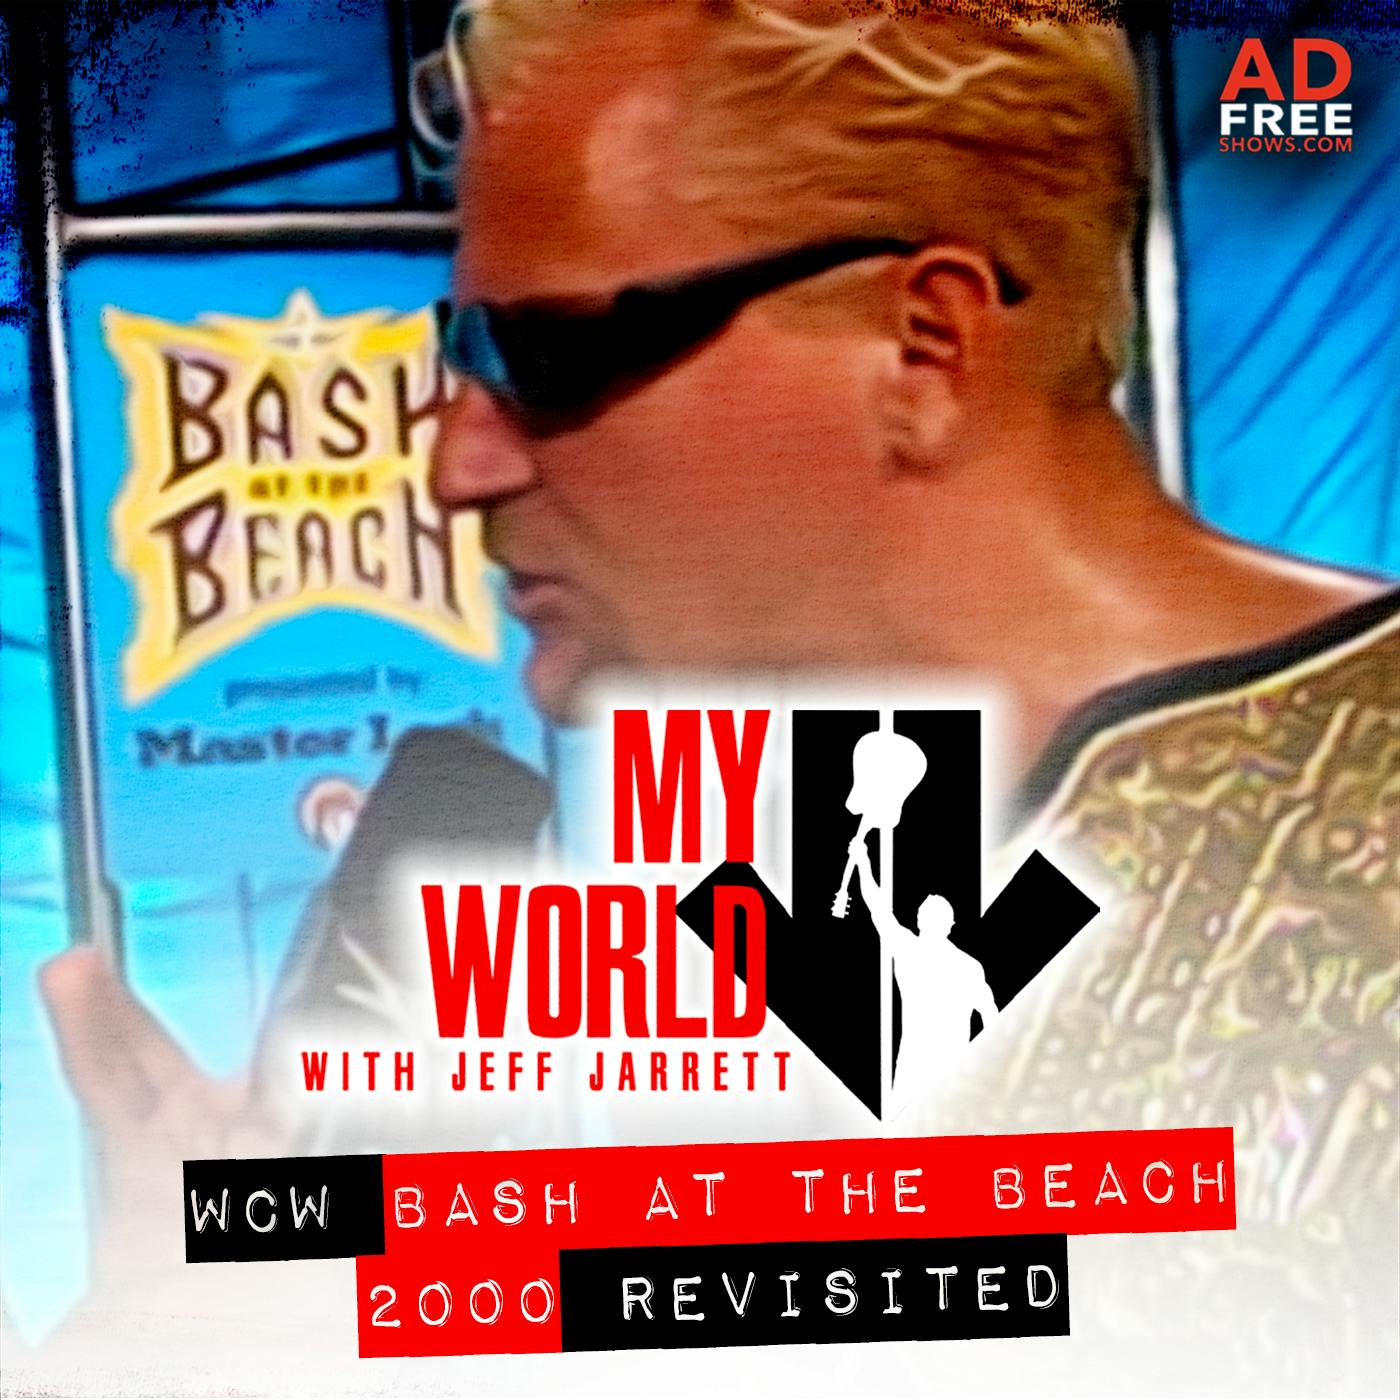 Episode 117: Bash at the Beach 2000 Revisited